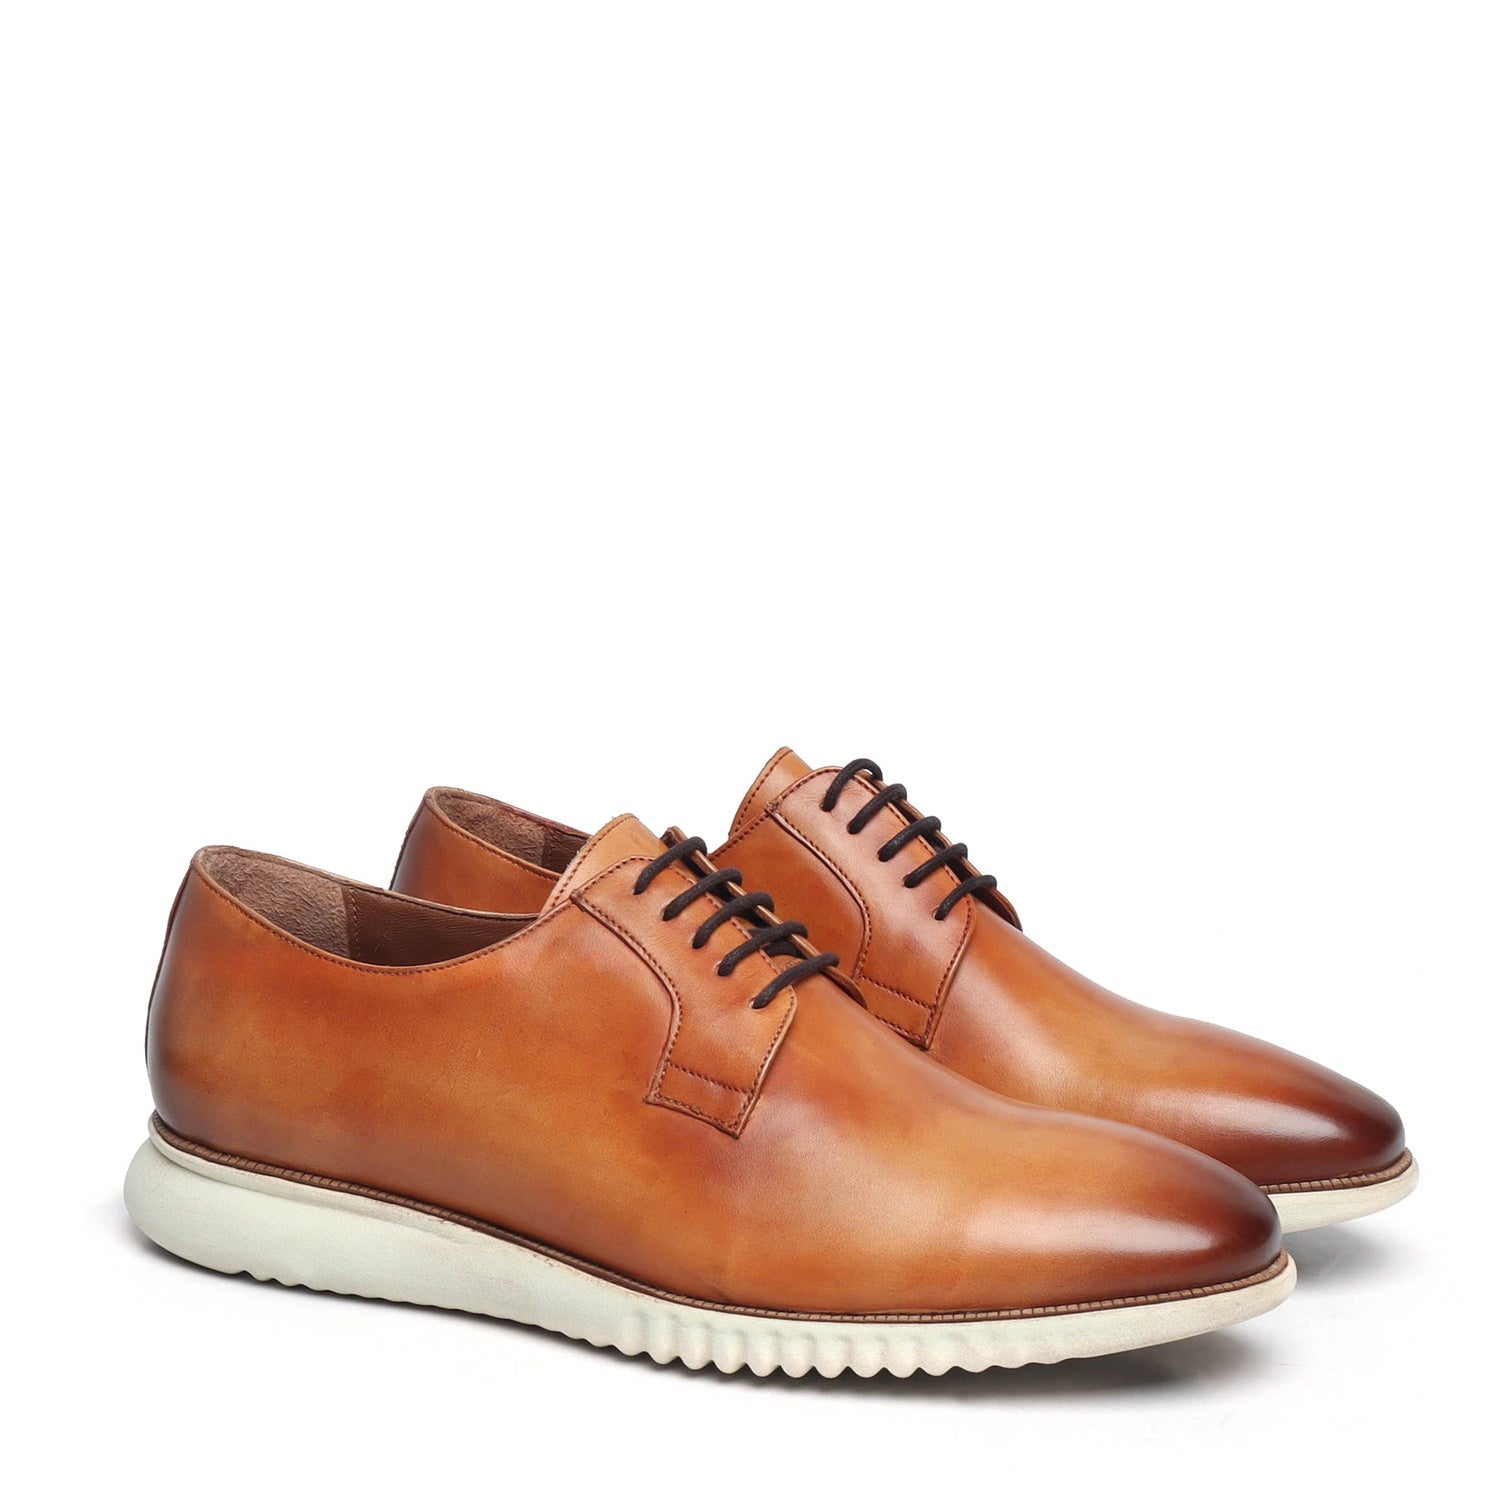 Tan Leather Formal Shoes in Genuine Leather with White Sole By Brune & Bareskin